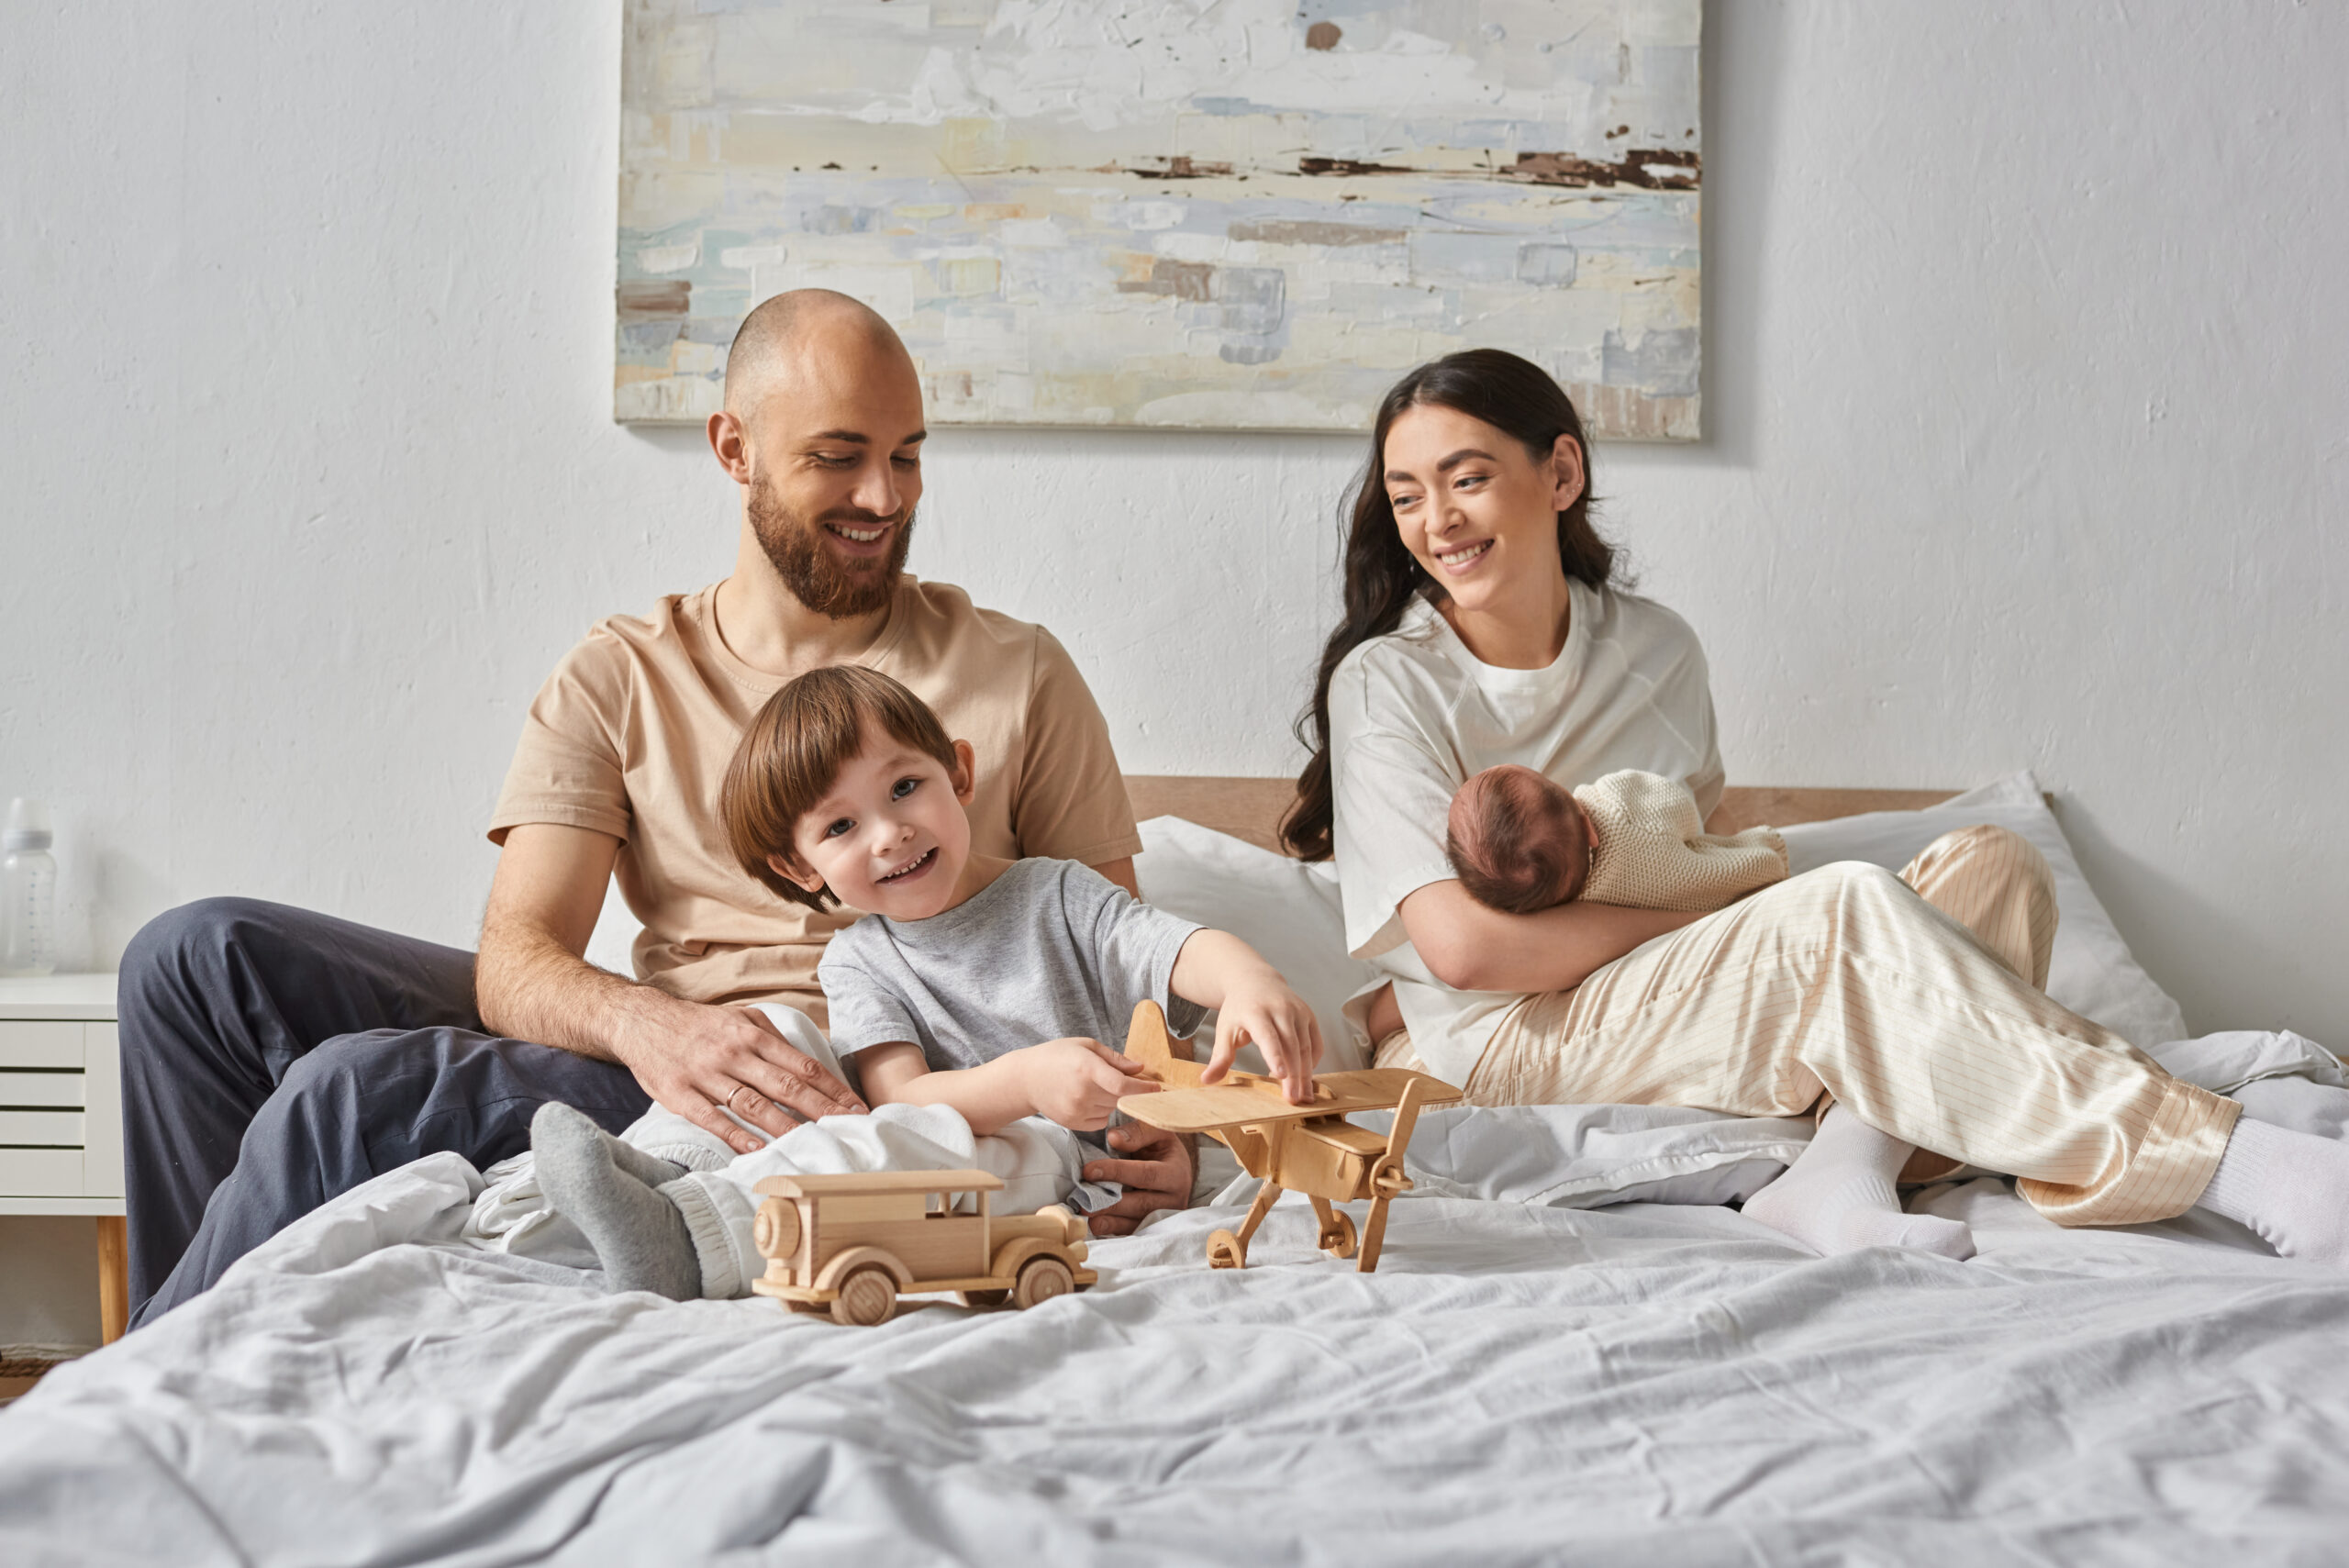 joyous family having great time together relaxing in bed and smiling at each other, modern parenting